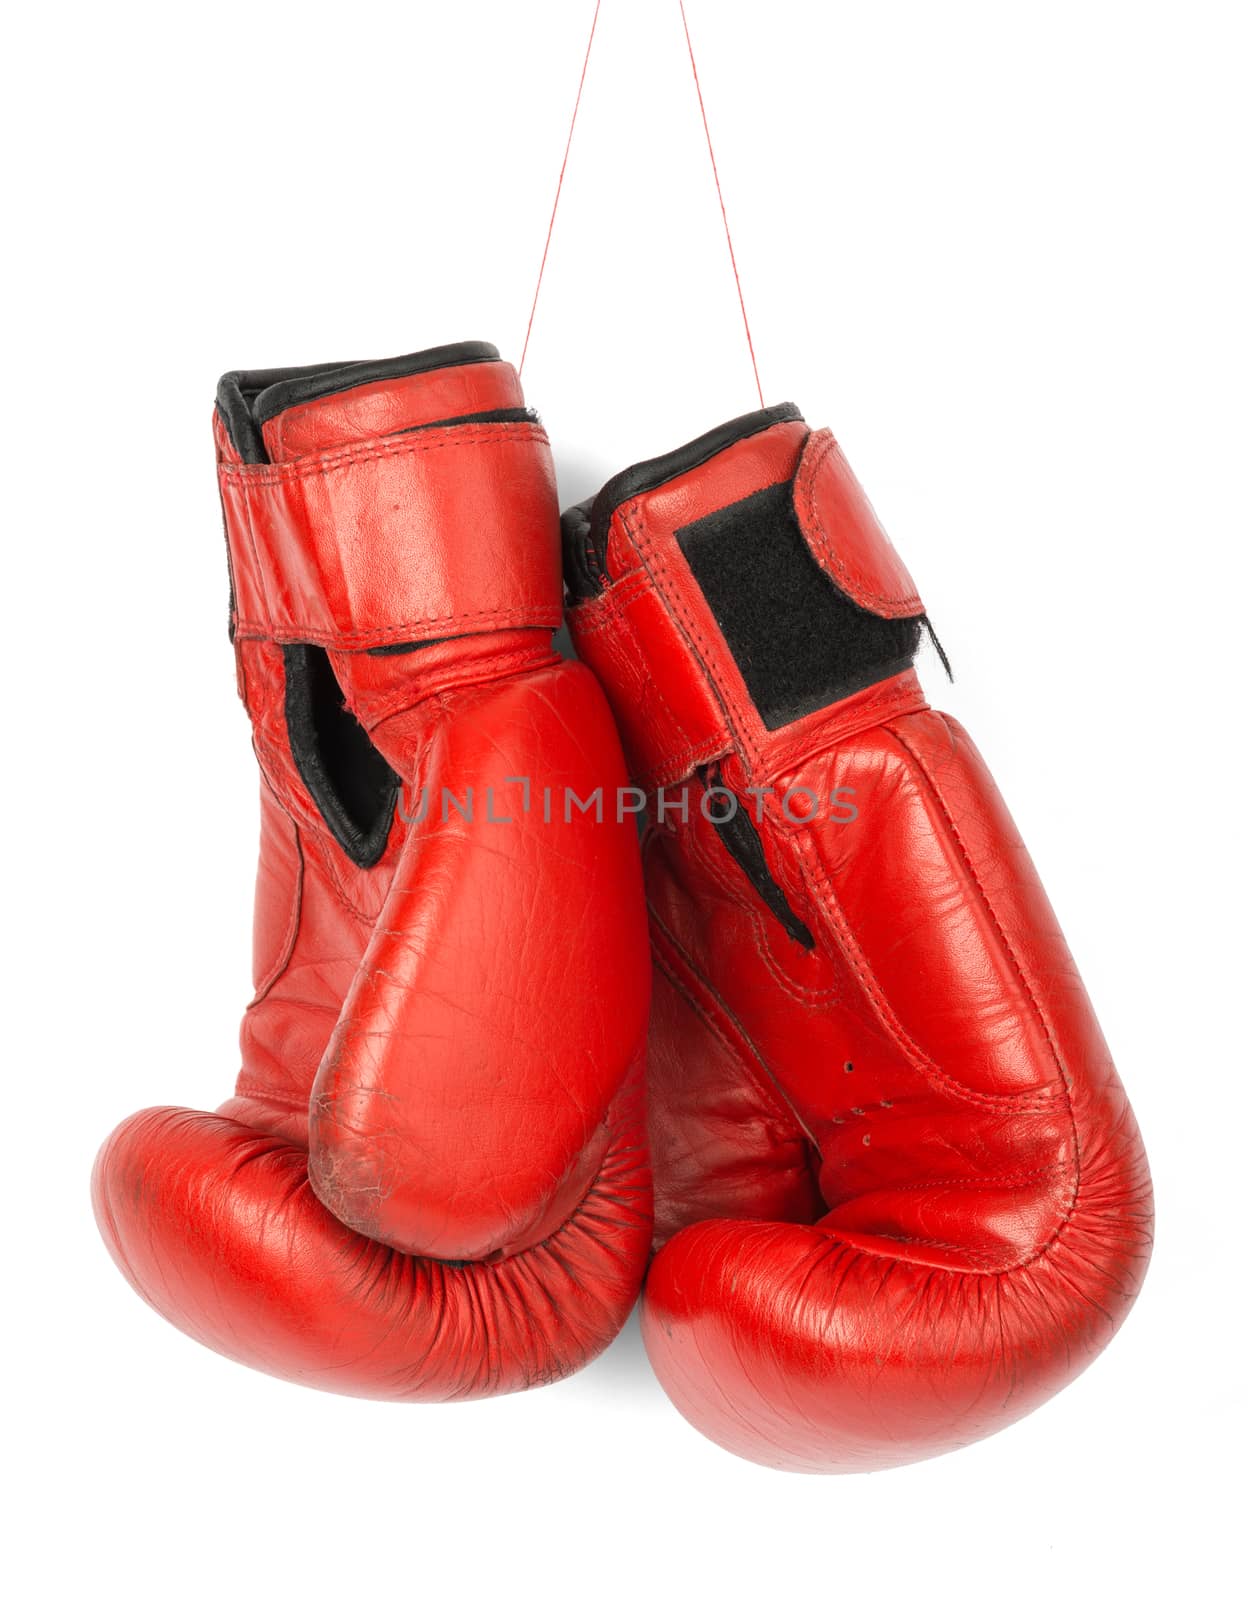 Red boxing gloves, side view by cherezoff